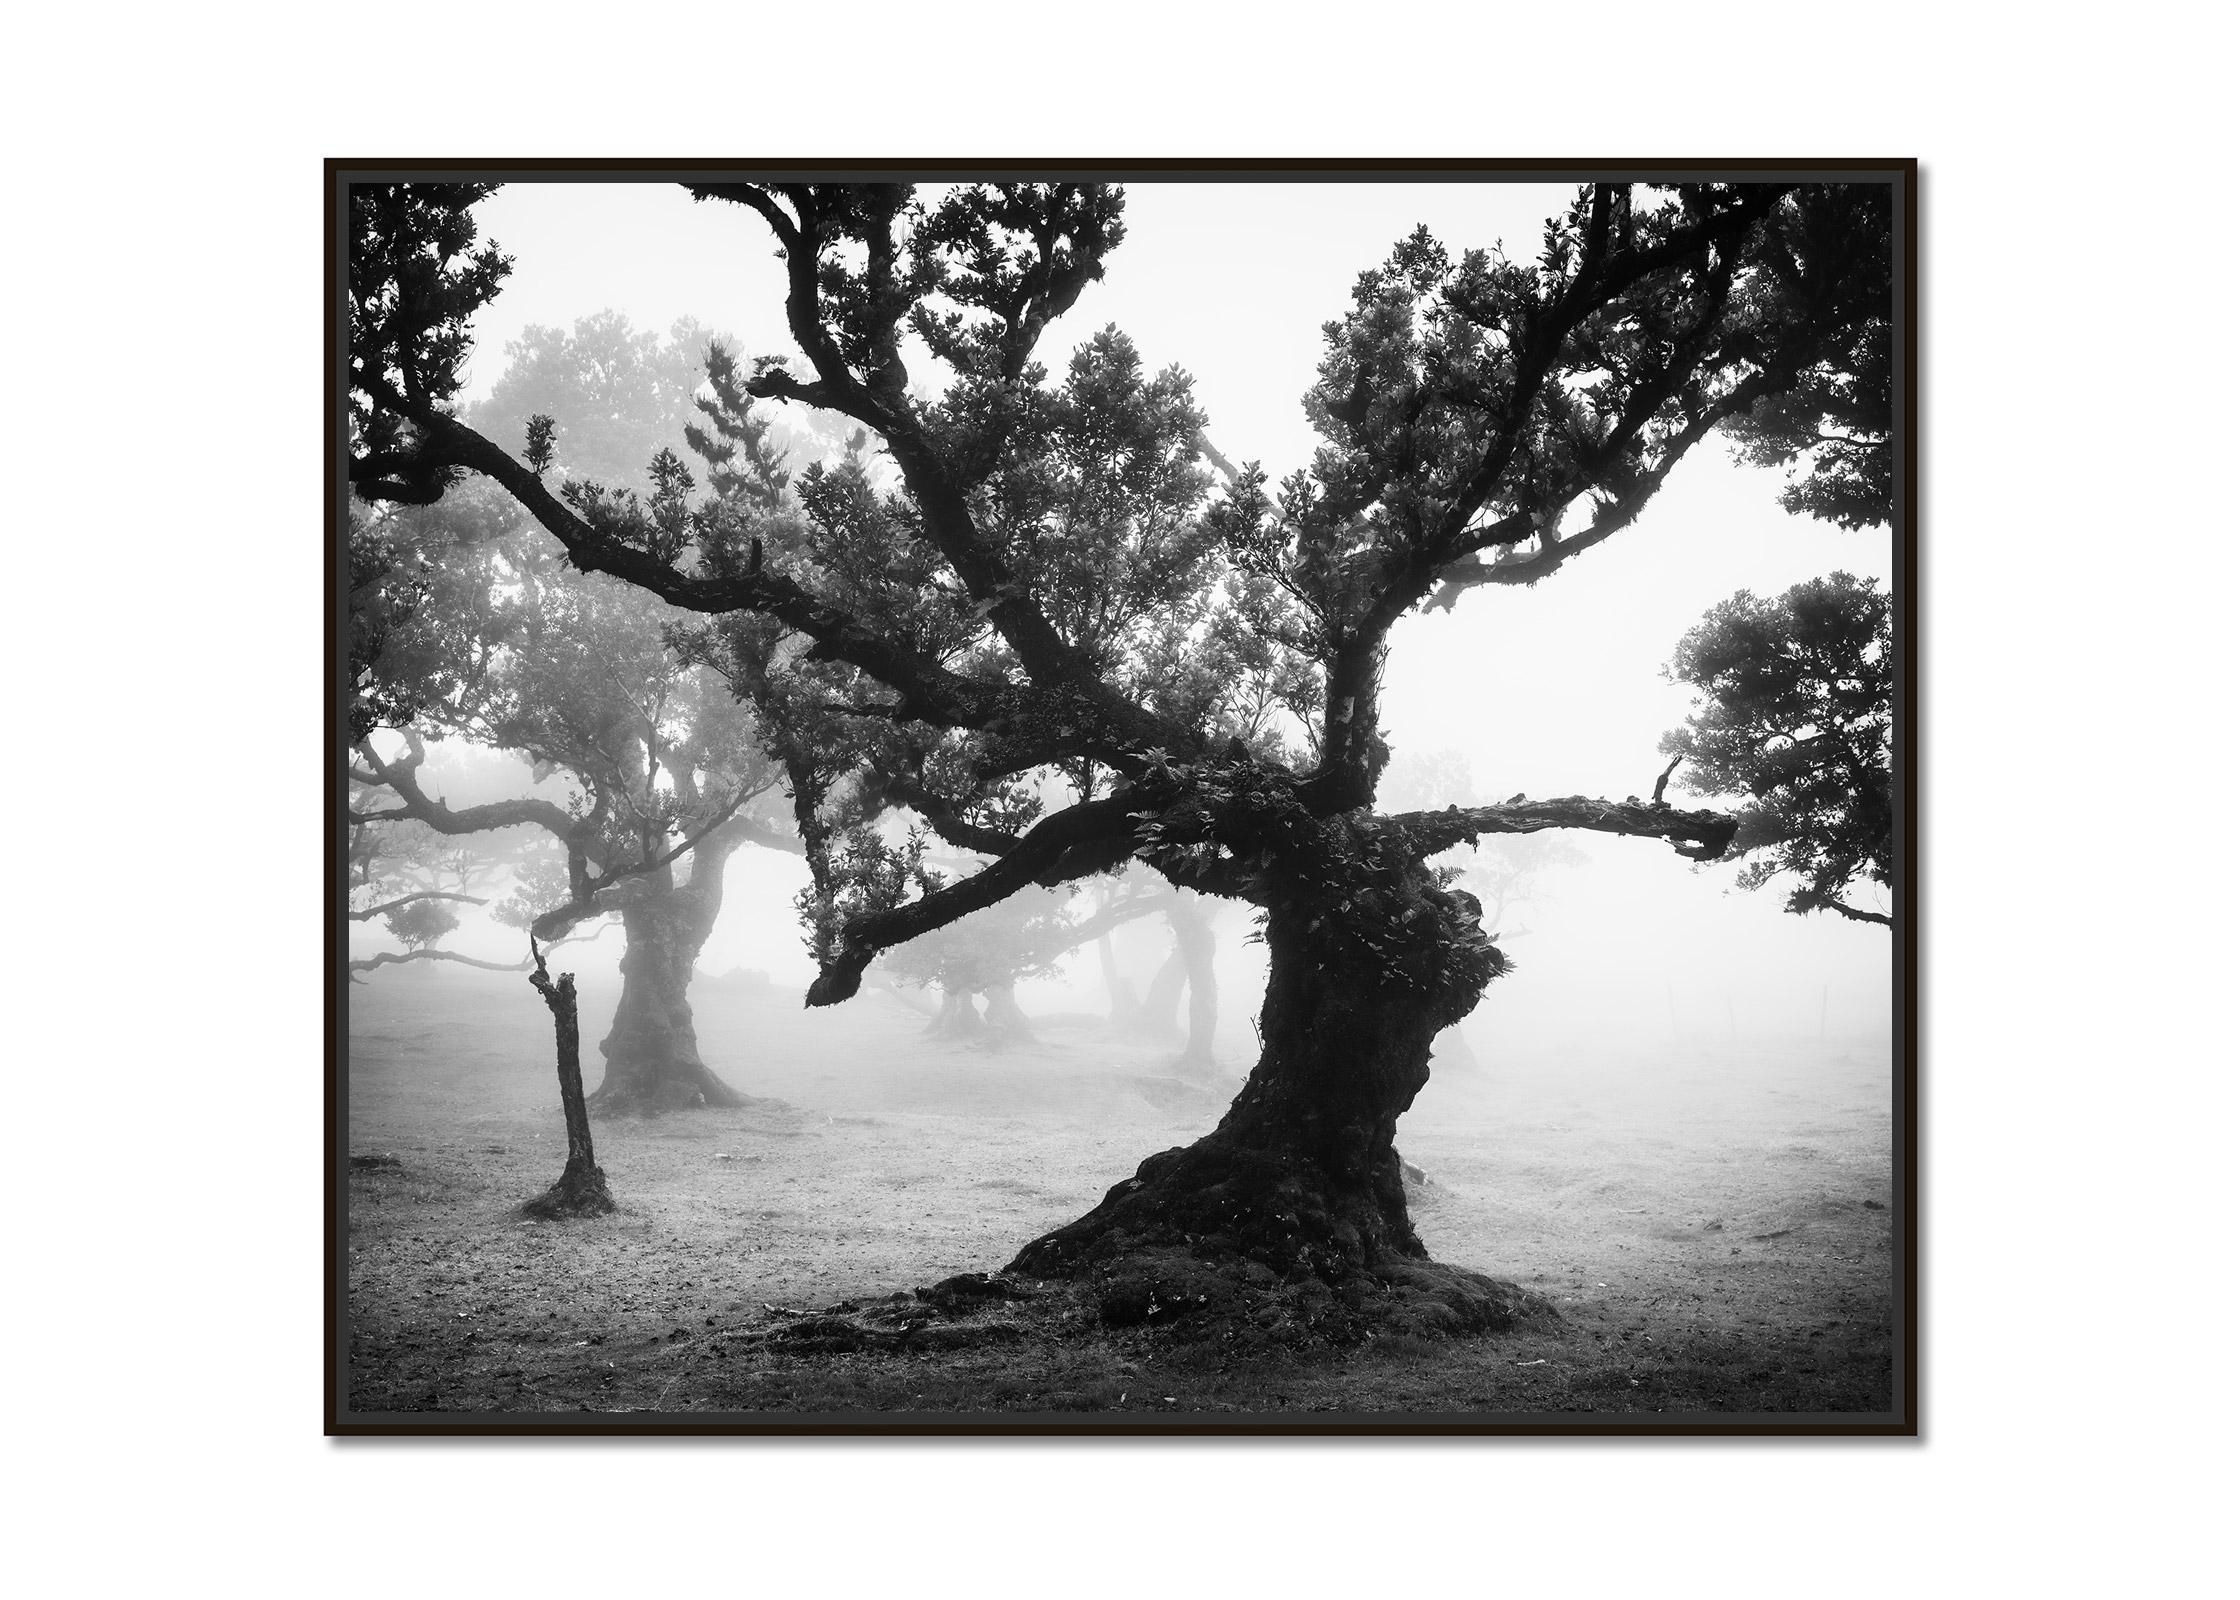 Ancient Laurisilva Forest, mystical, misty, black and white photo, landscape - Photograph by Gerald Berghammer